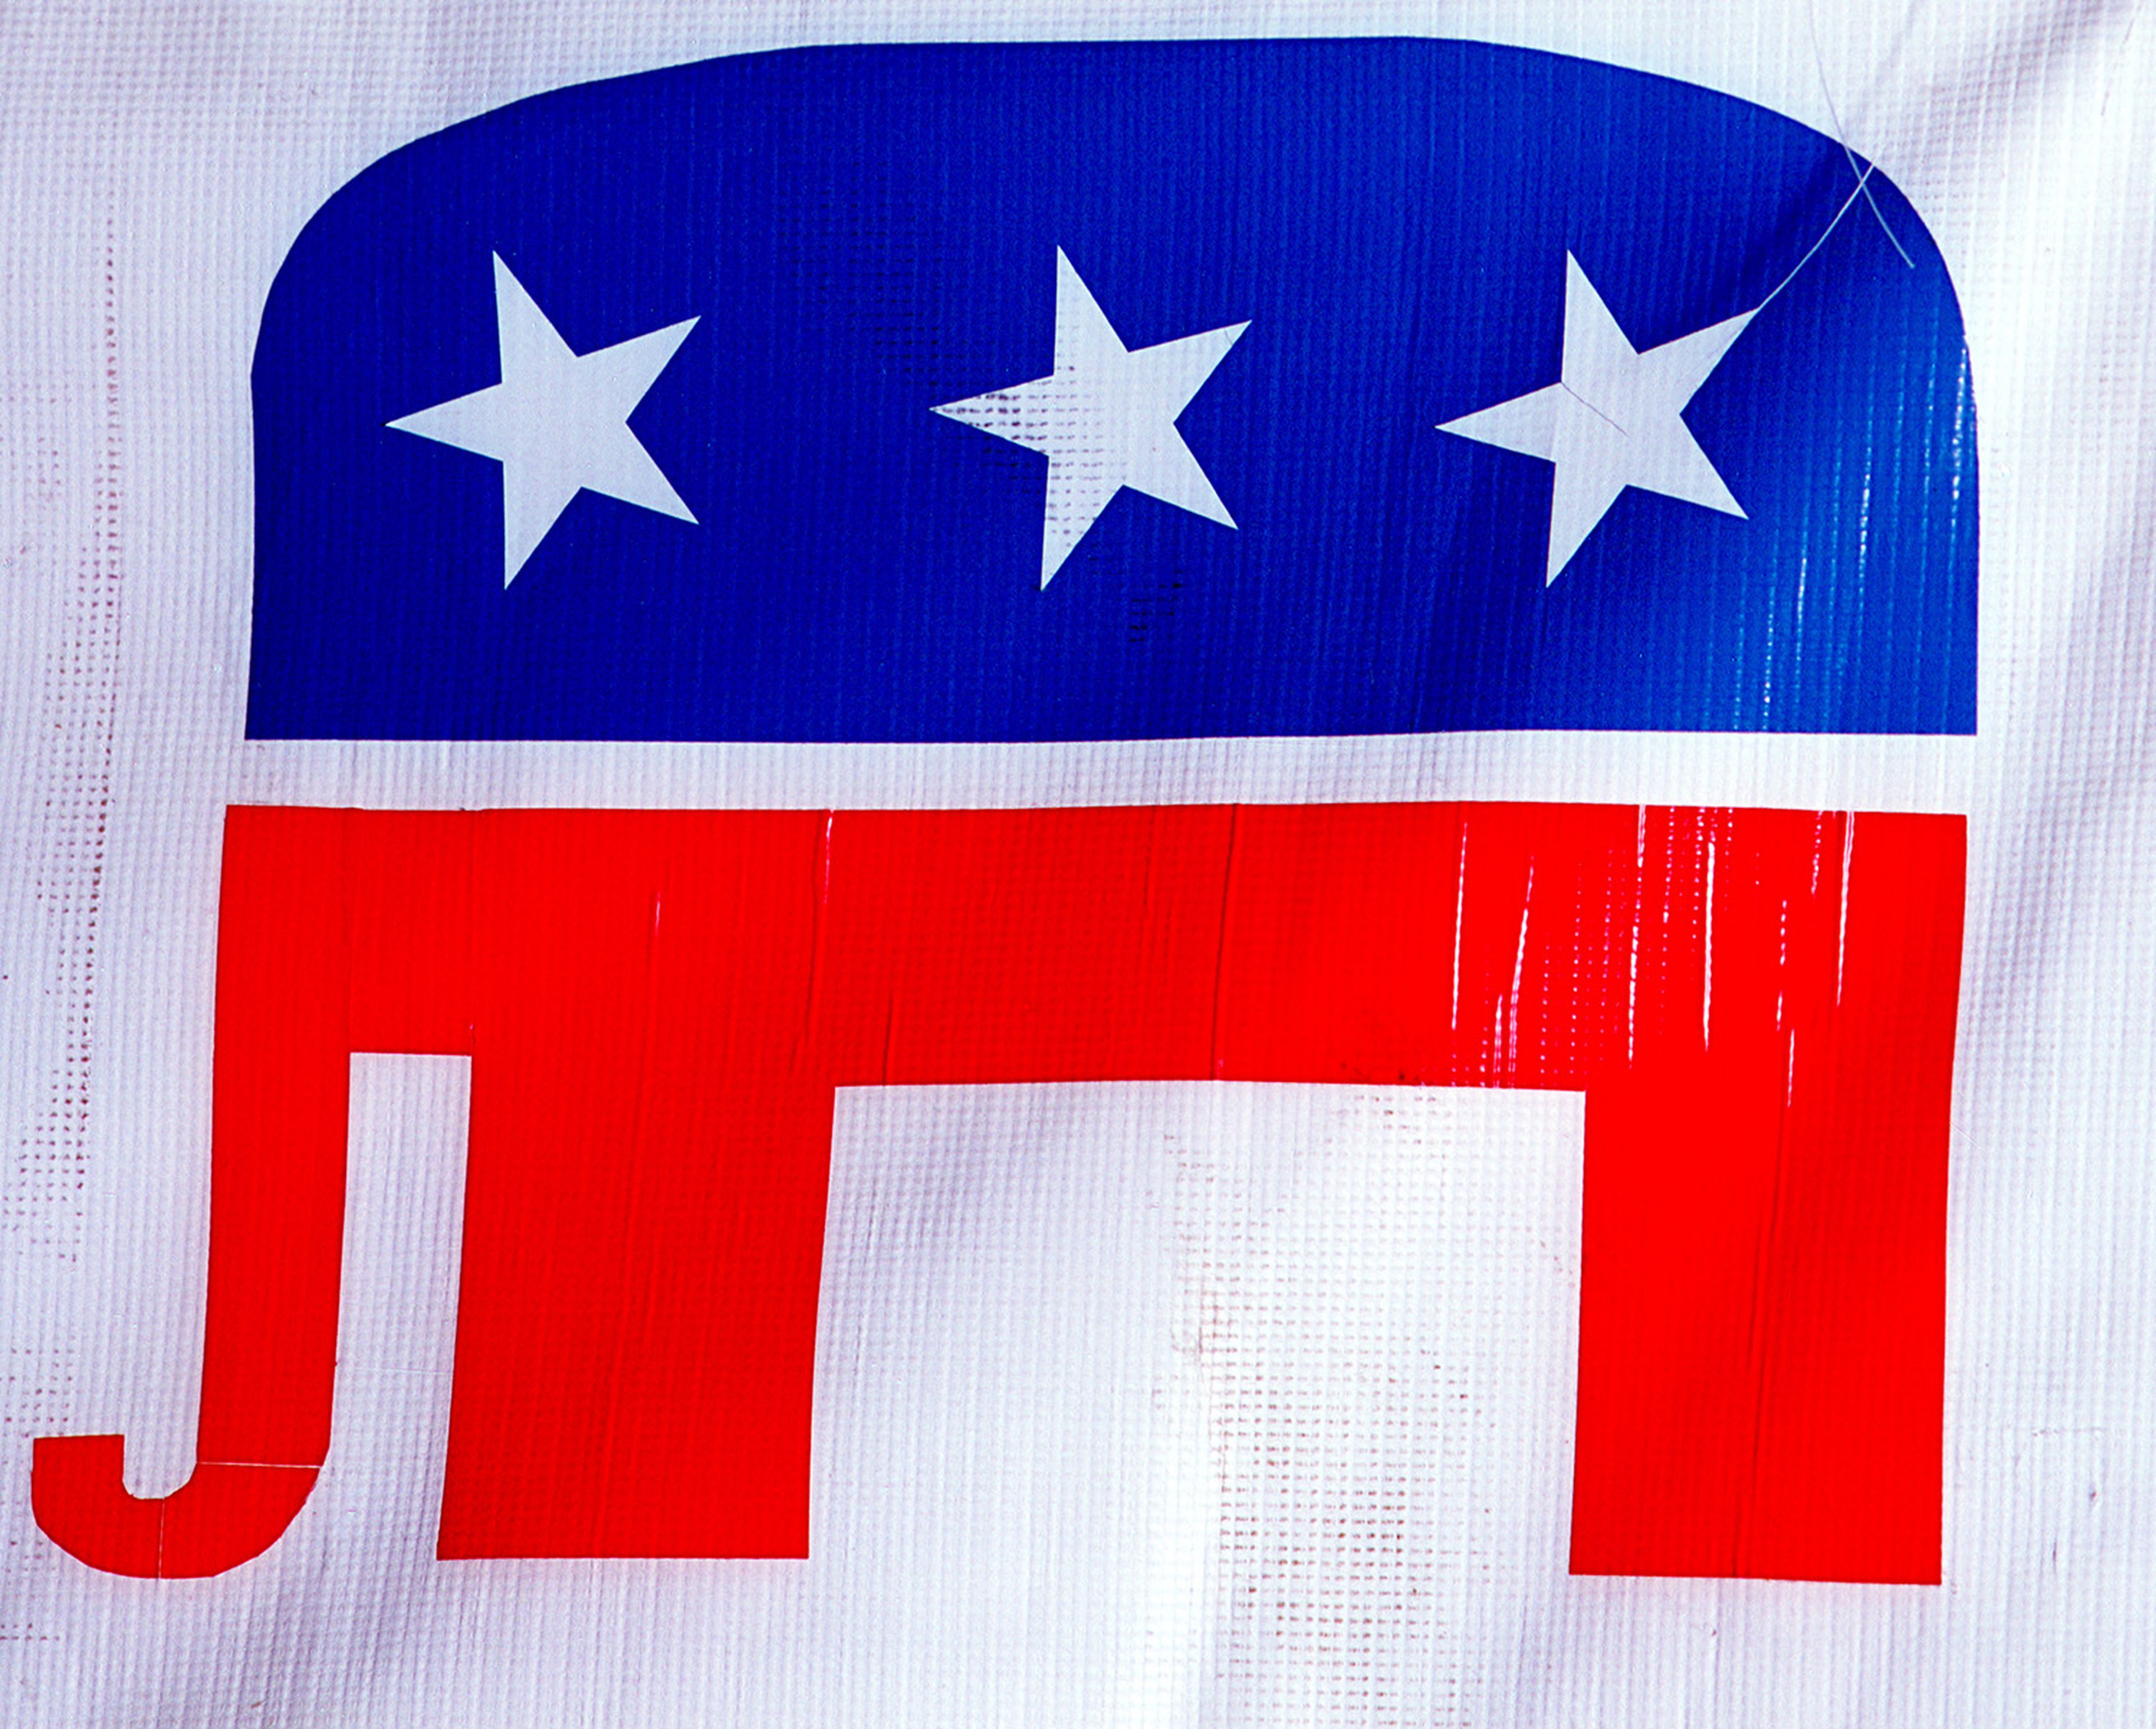 The Republican Party&#8217;s elephant symbol is seen on display Oct. 24, 2000, at the Republican campaign headquarters in El Paso, Texas. (Photo by Joe Raedle/Getty Images)